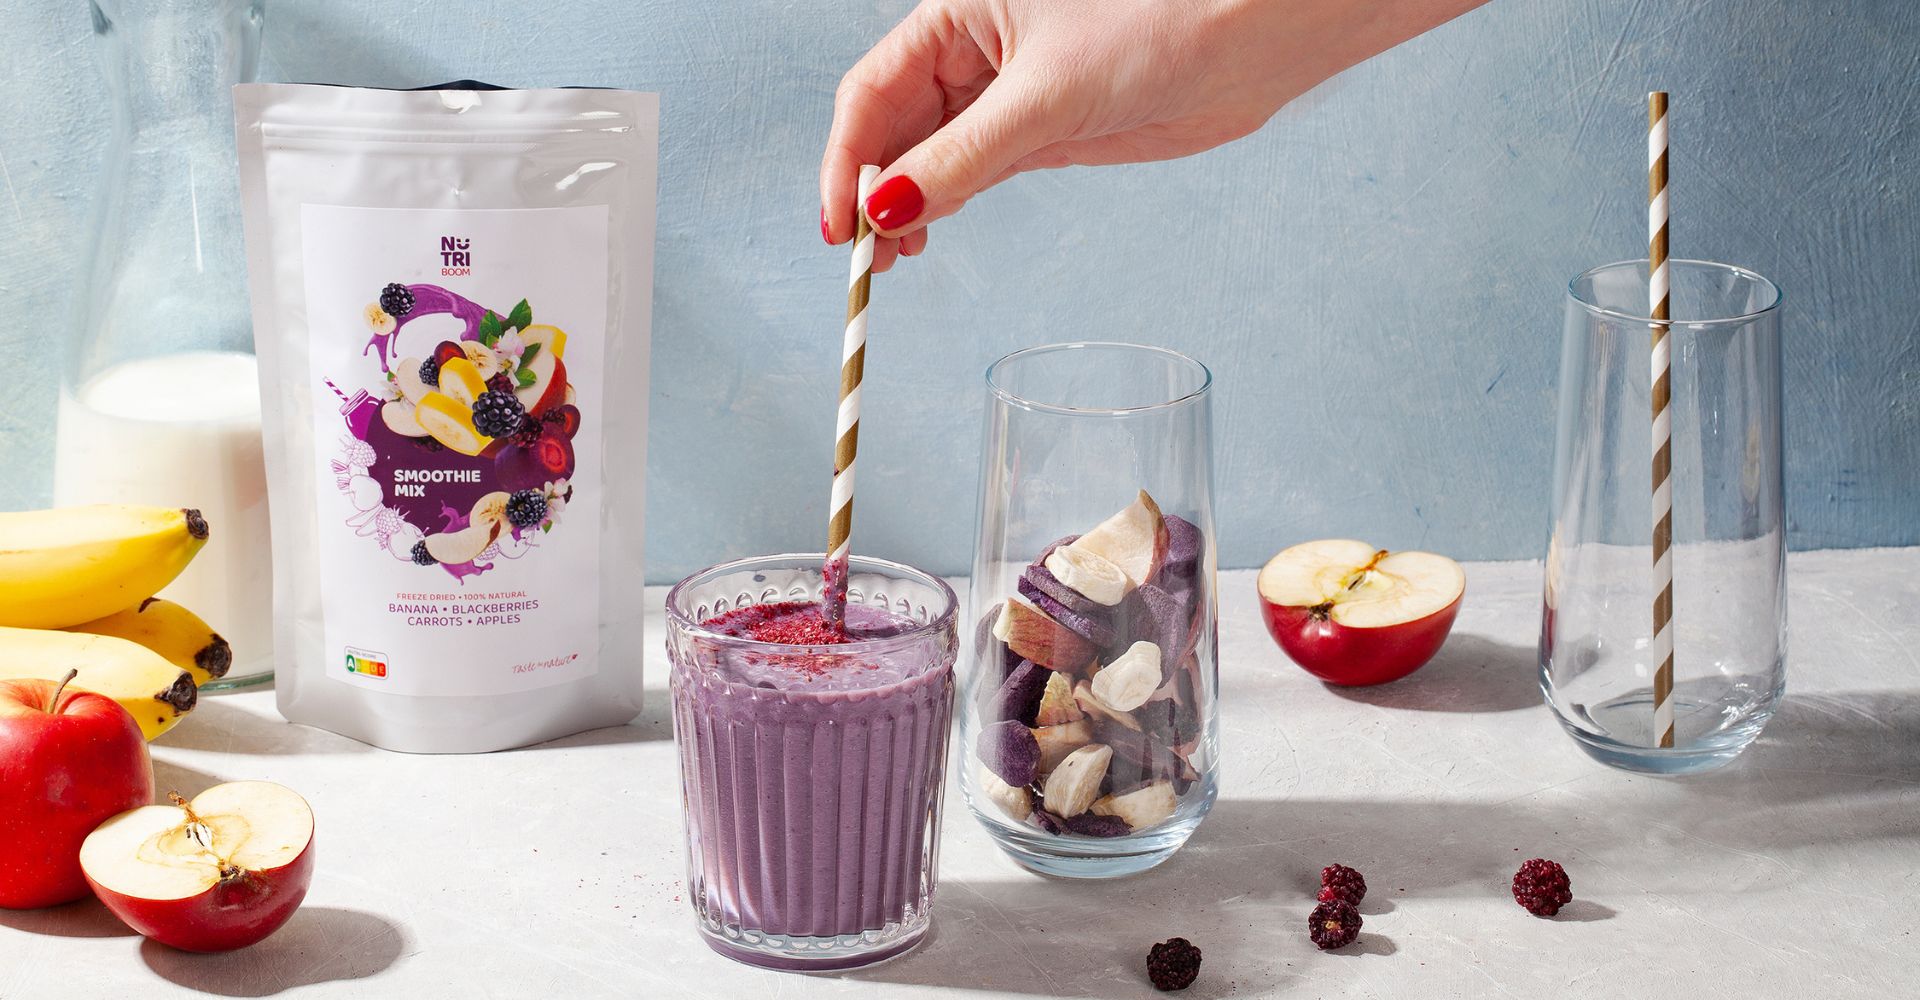 smoothie-blend-from-freeze-dried-bananas-apples-blackberries-purple-dark-carrots-ready-to-blend-freeze-dried